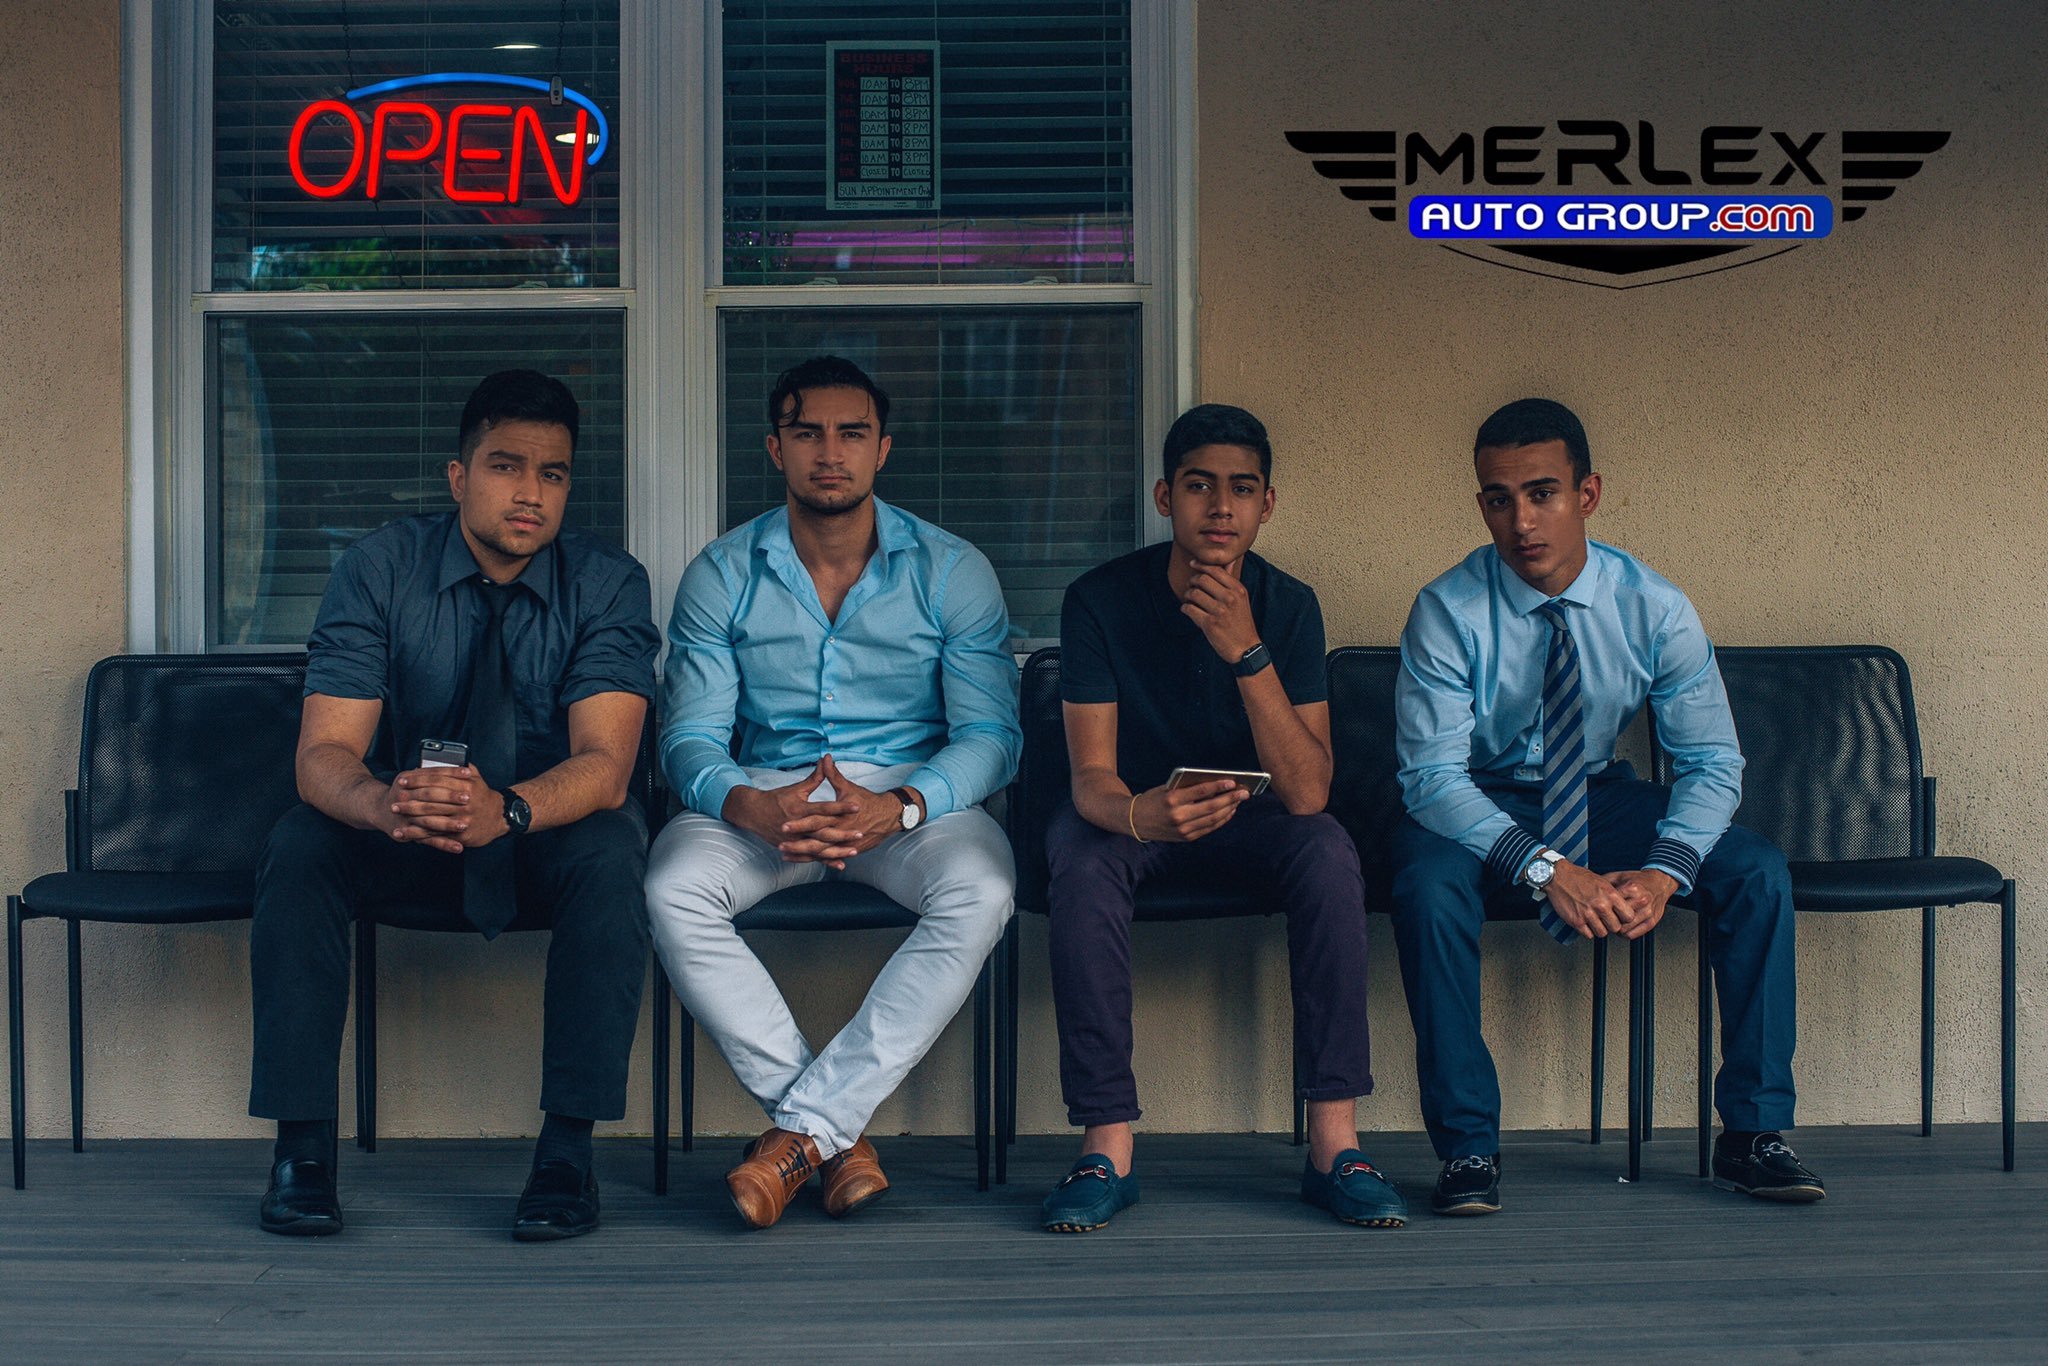 Merlex Auto Group: Your Ultimate Destination For Quality Vehicles